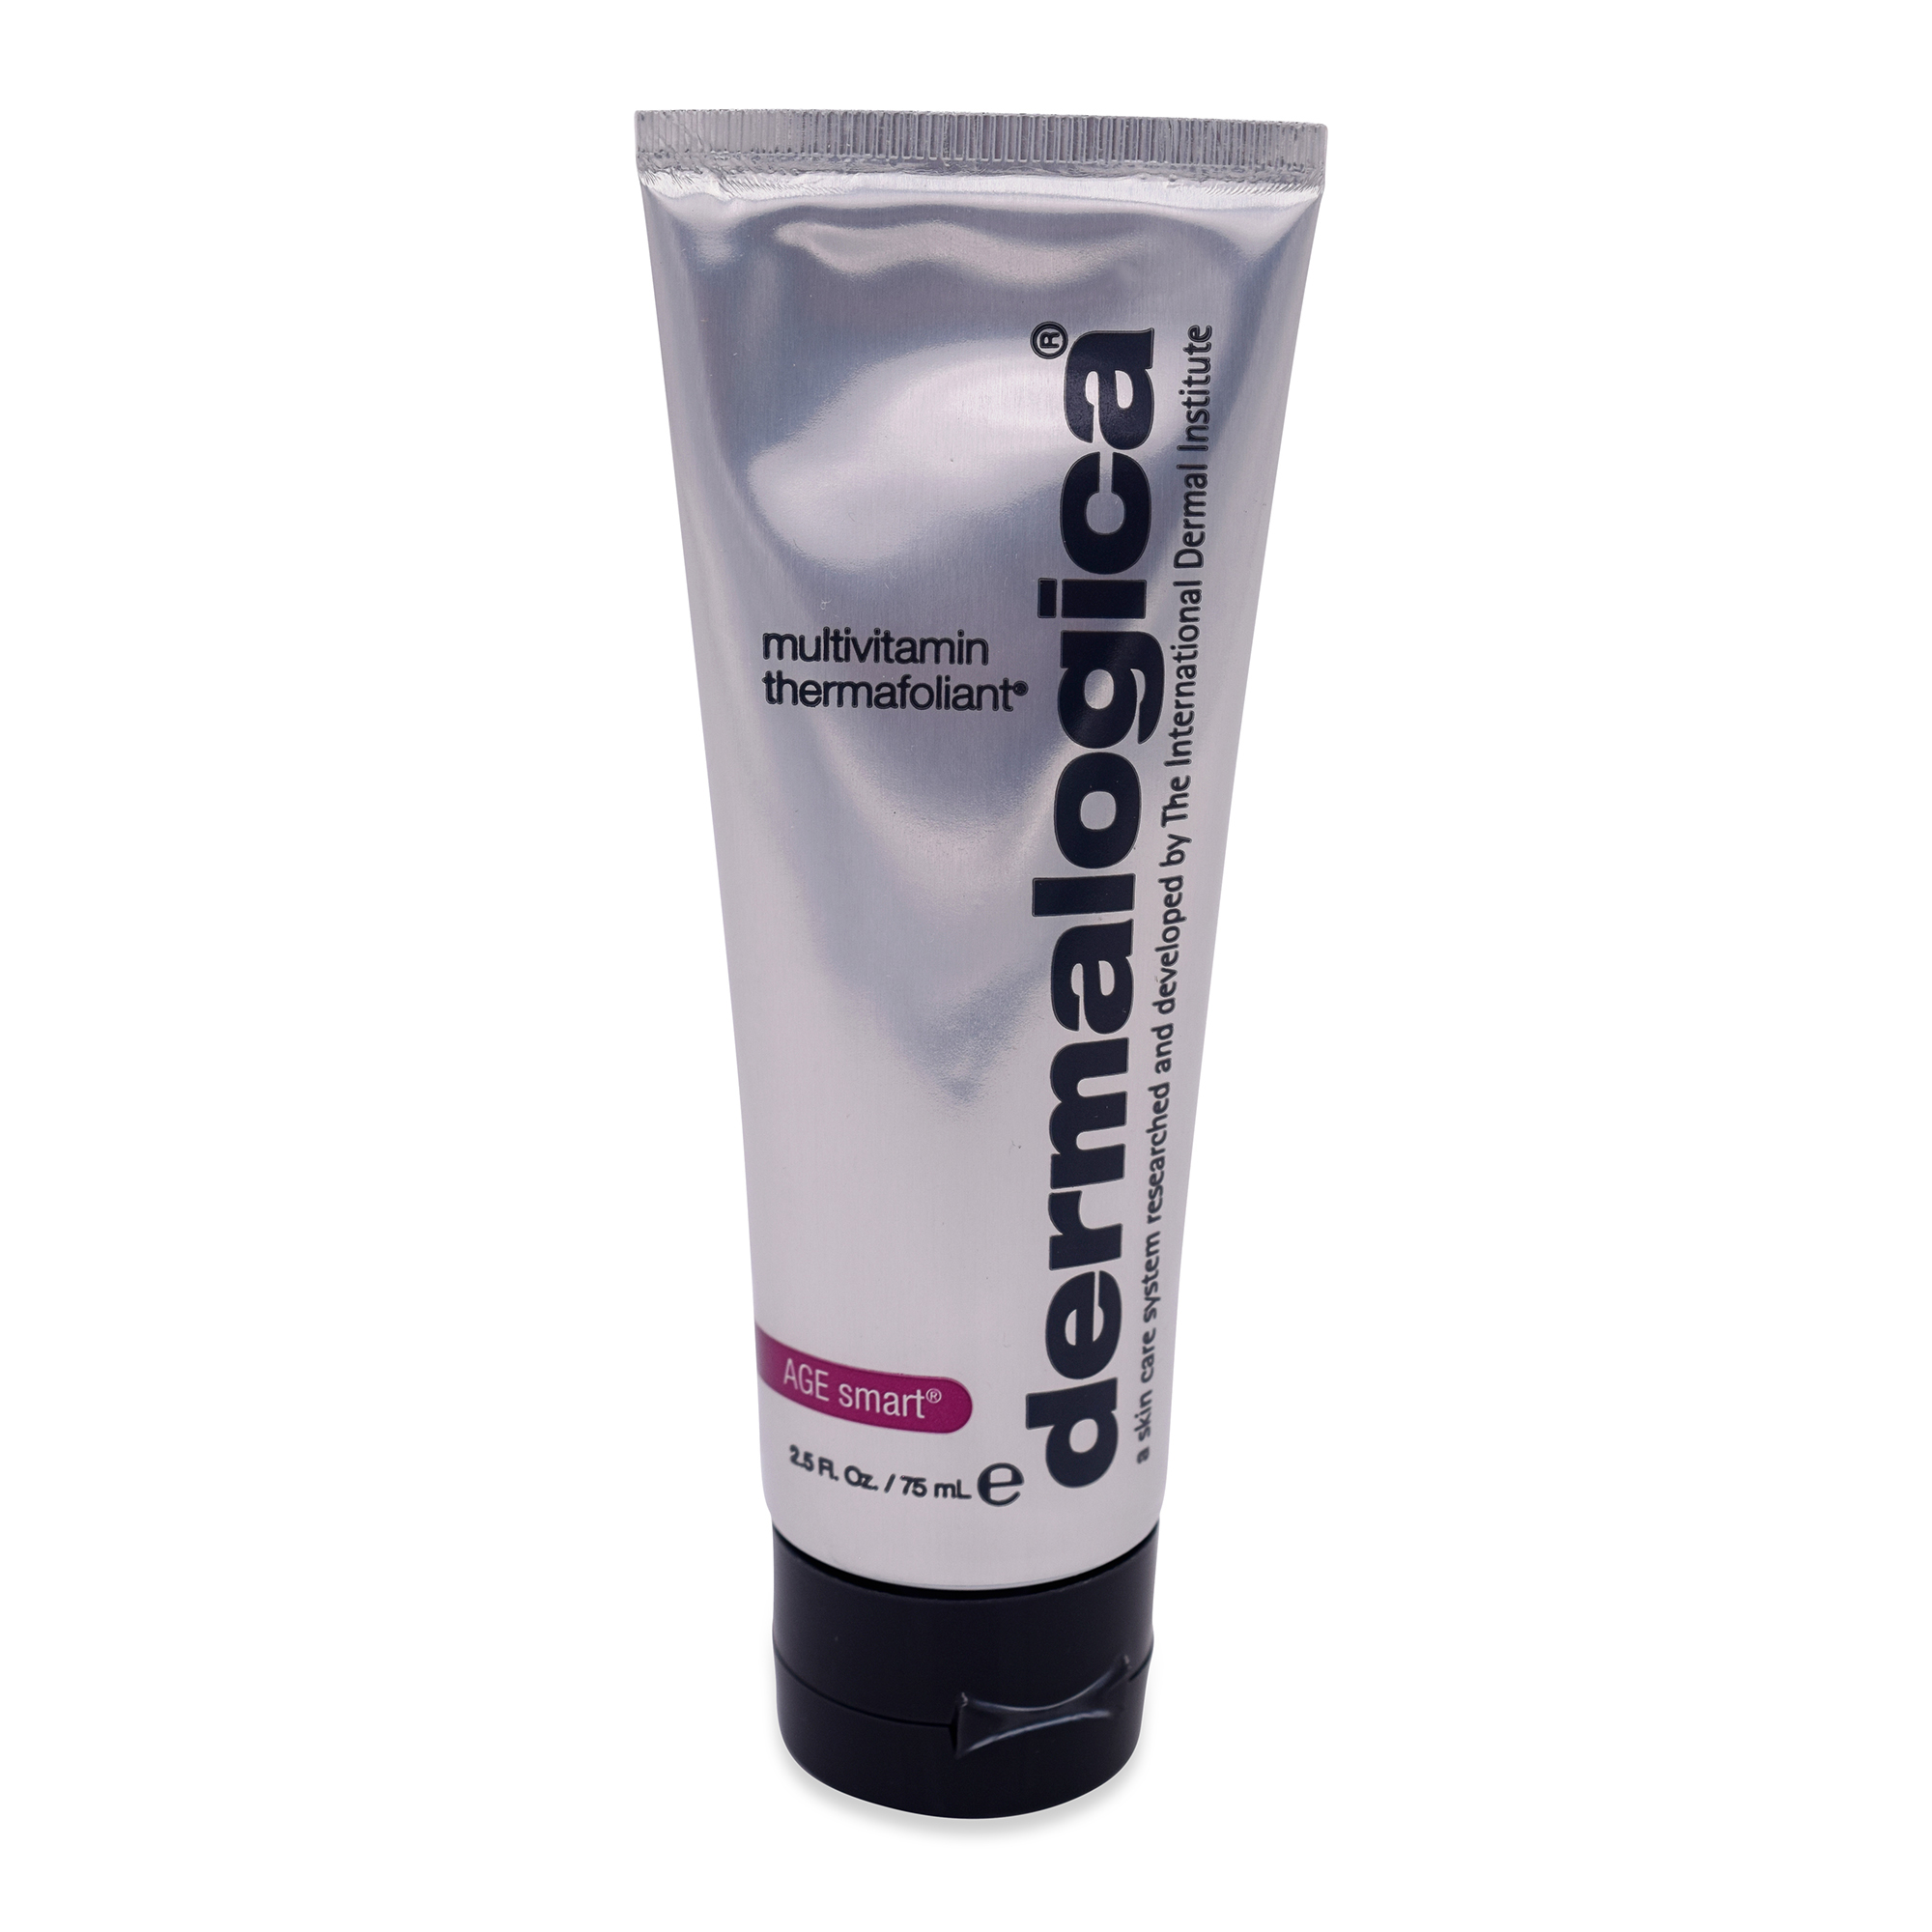 Age Smart Multivitamin Thermafoliant by Dermalogica for Unisex - 2.5 oz Scrub - image 1 of 5